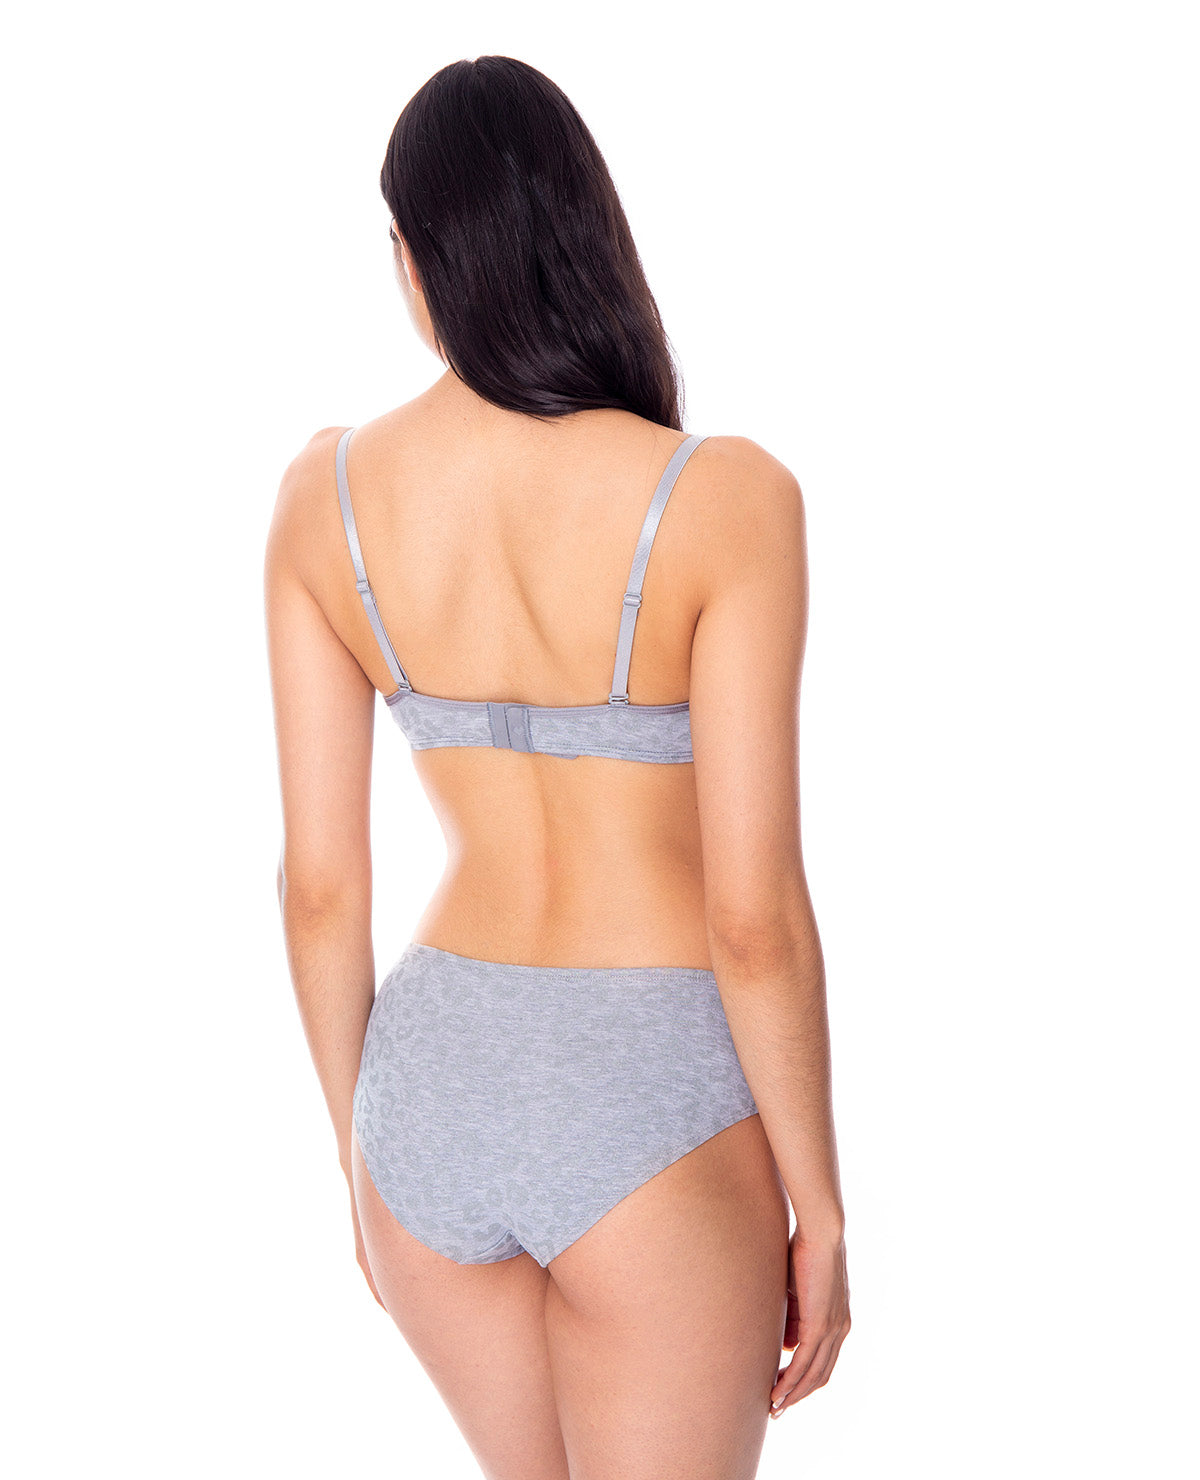 Brasier _ Ropa Interior Colombia _ St Even _ 35300